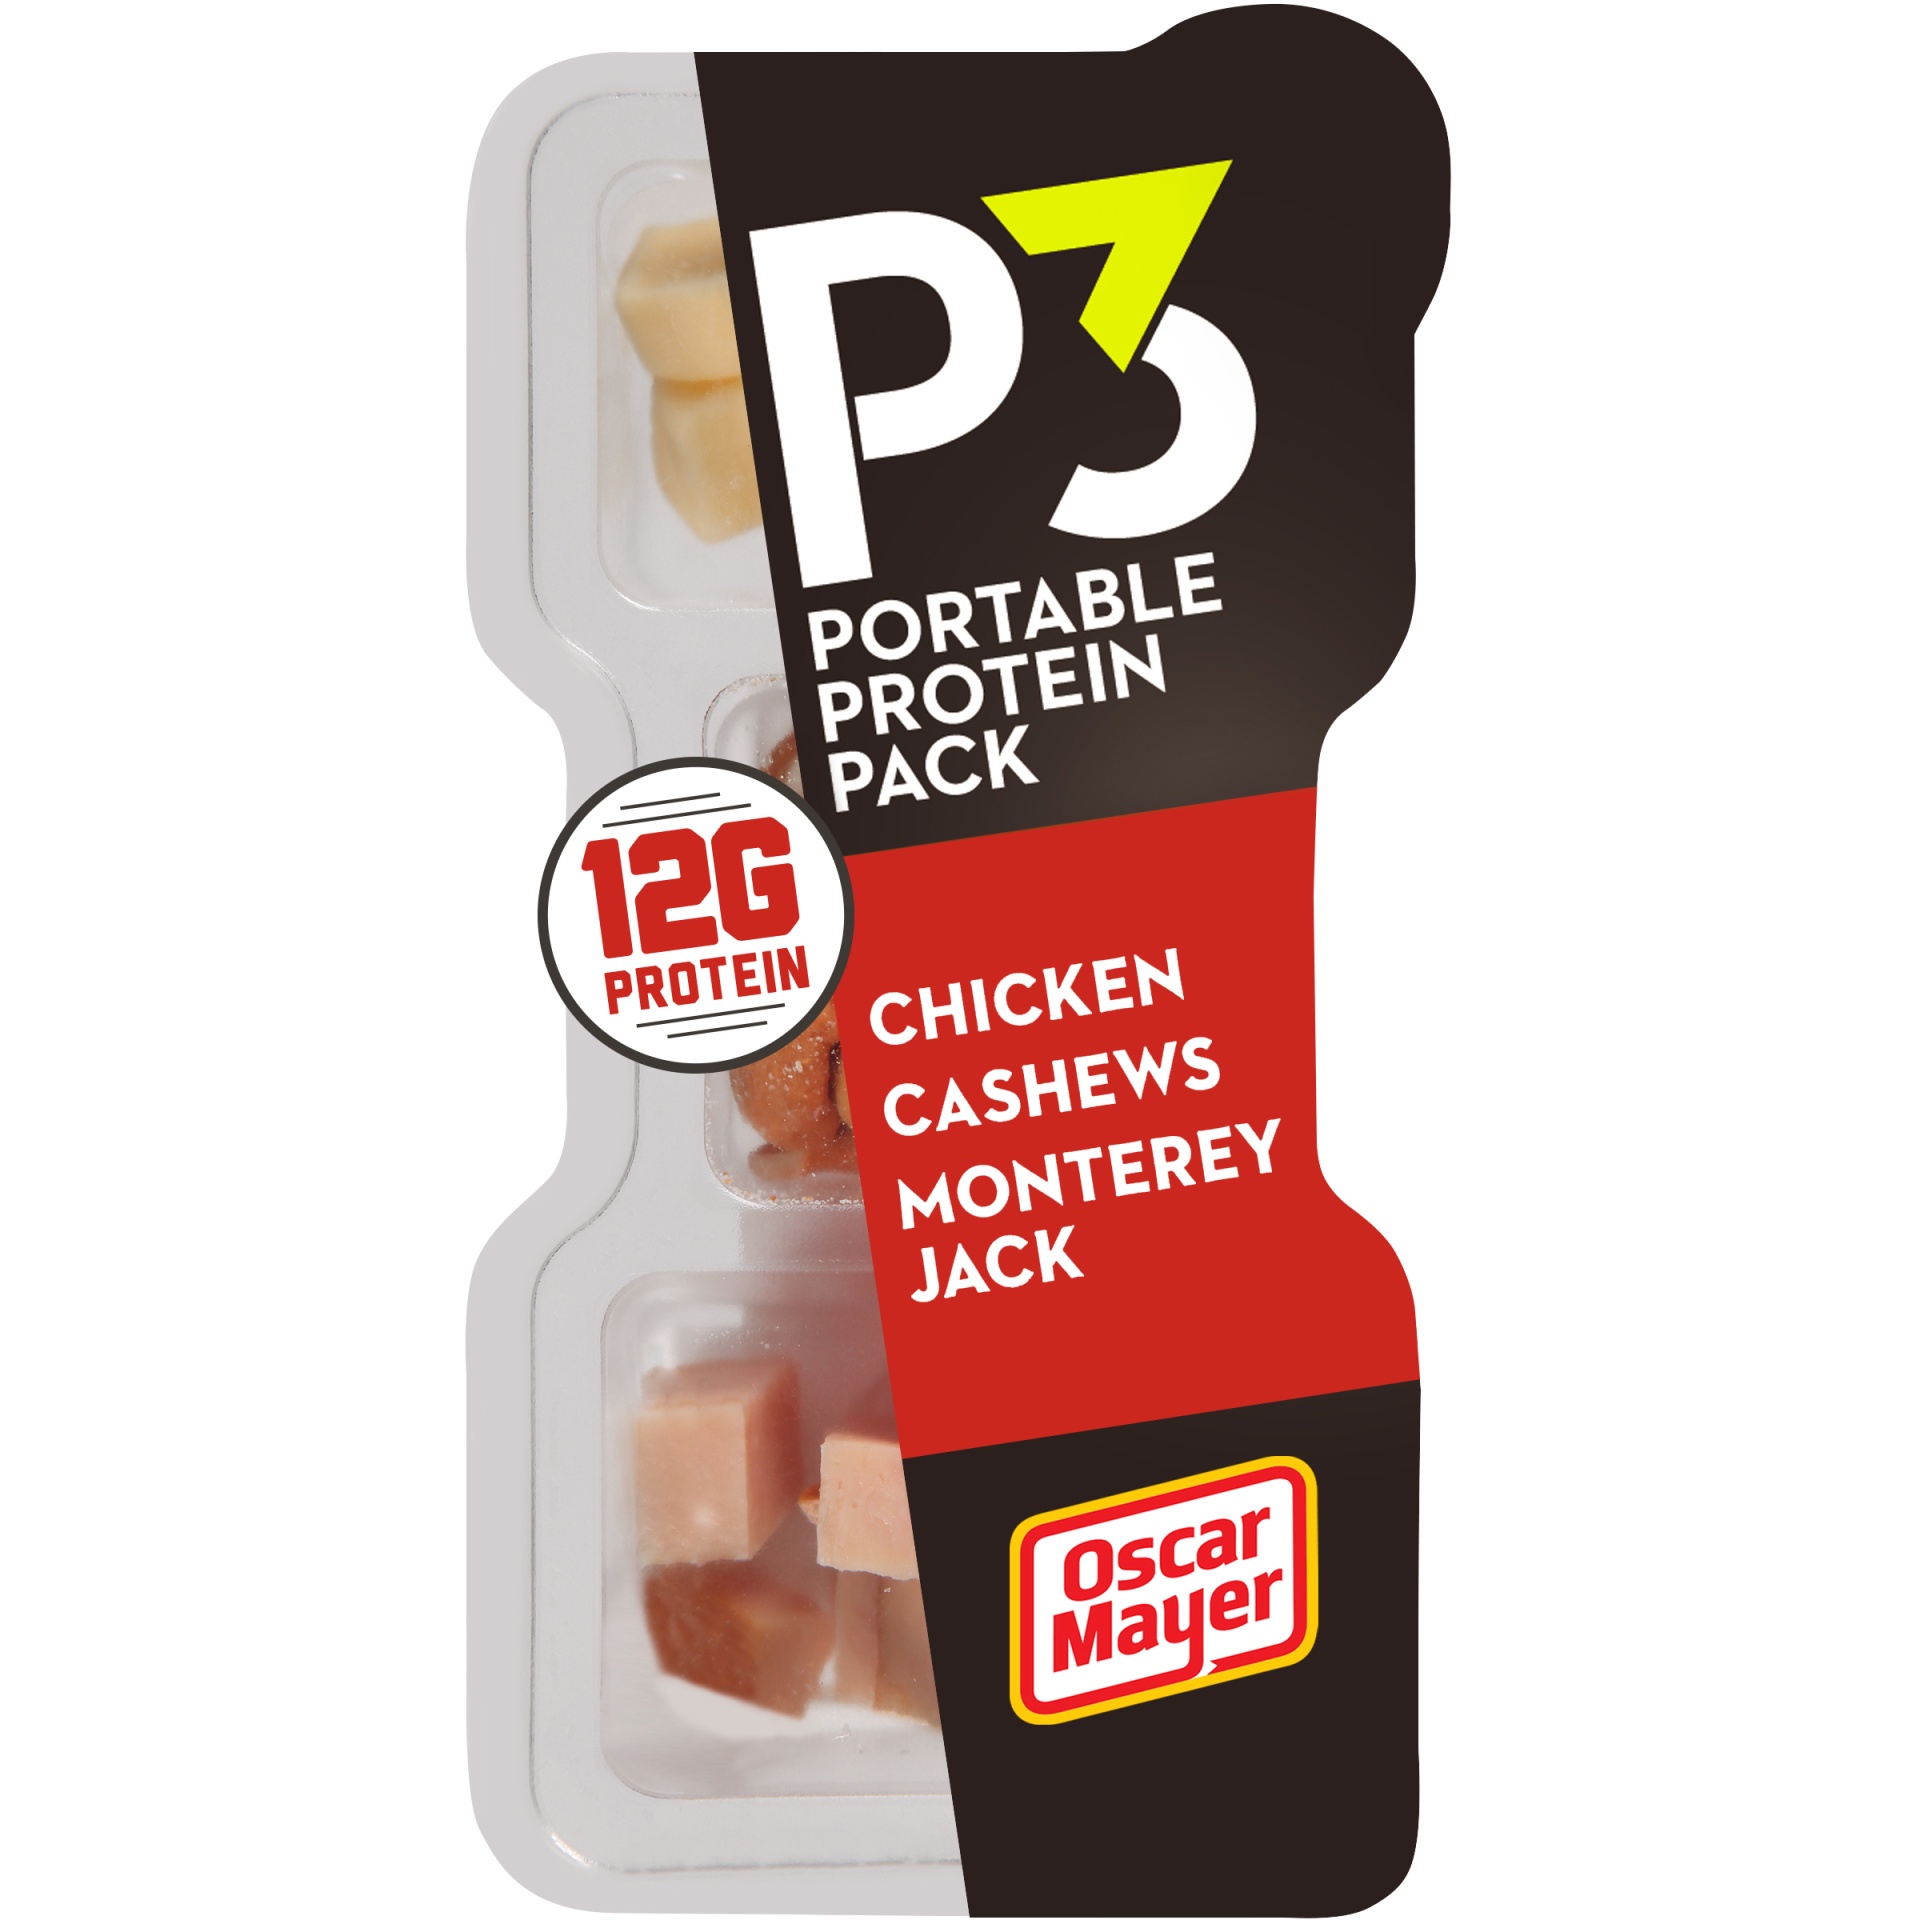 slide 1 of 4, P3 Portable Protein Snack Pack with Chicken, Cashews & Monterey Jack Cheese Tray, 2 oz